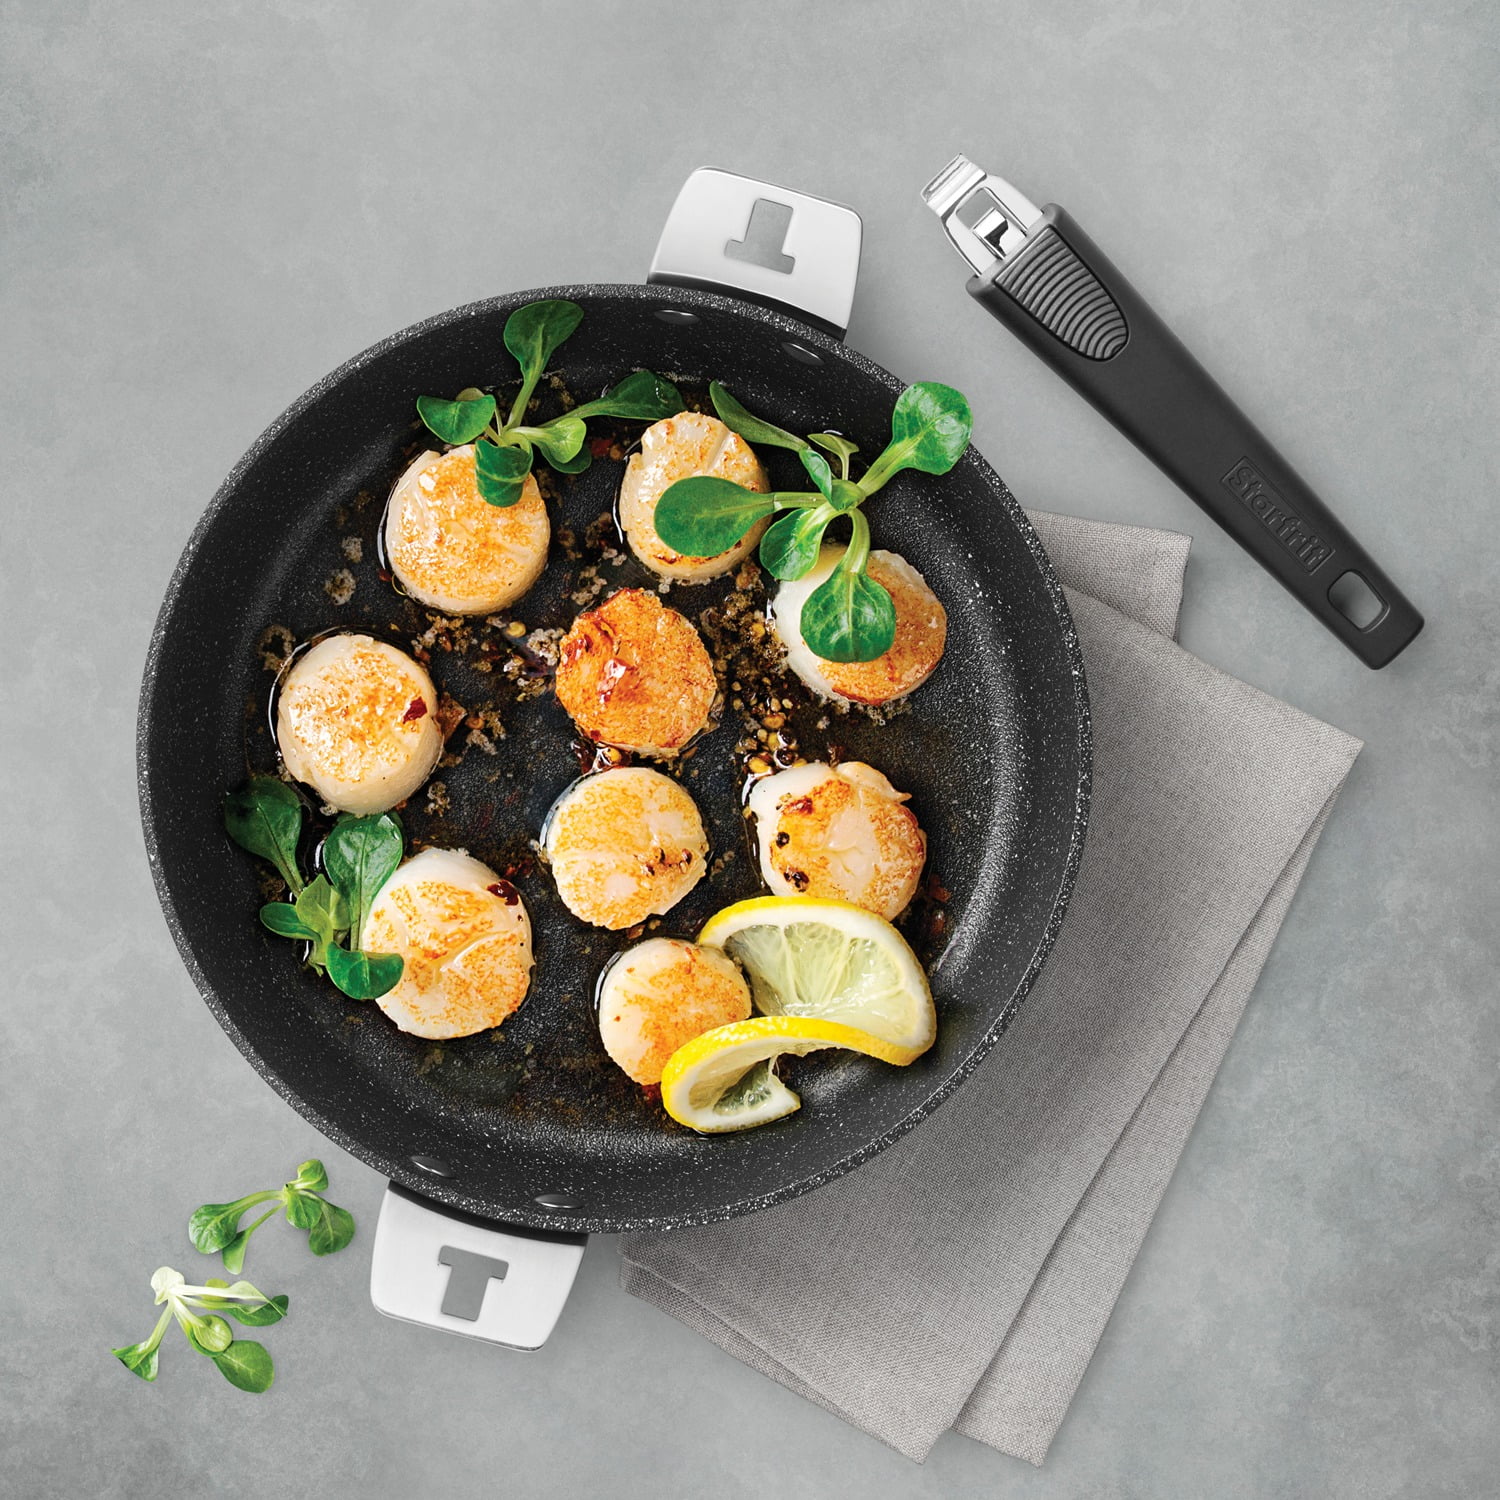 The Rock by Starfrit 11 Deep-Fry Pan with Lid and Bakelite Handle -  20356650